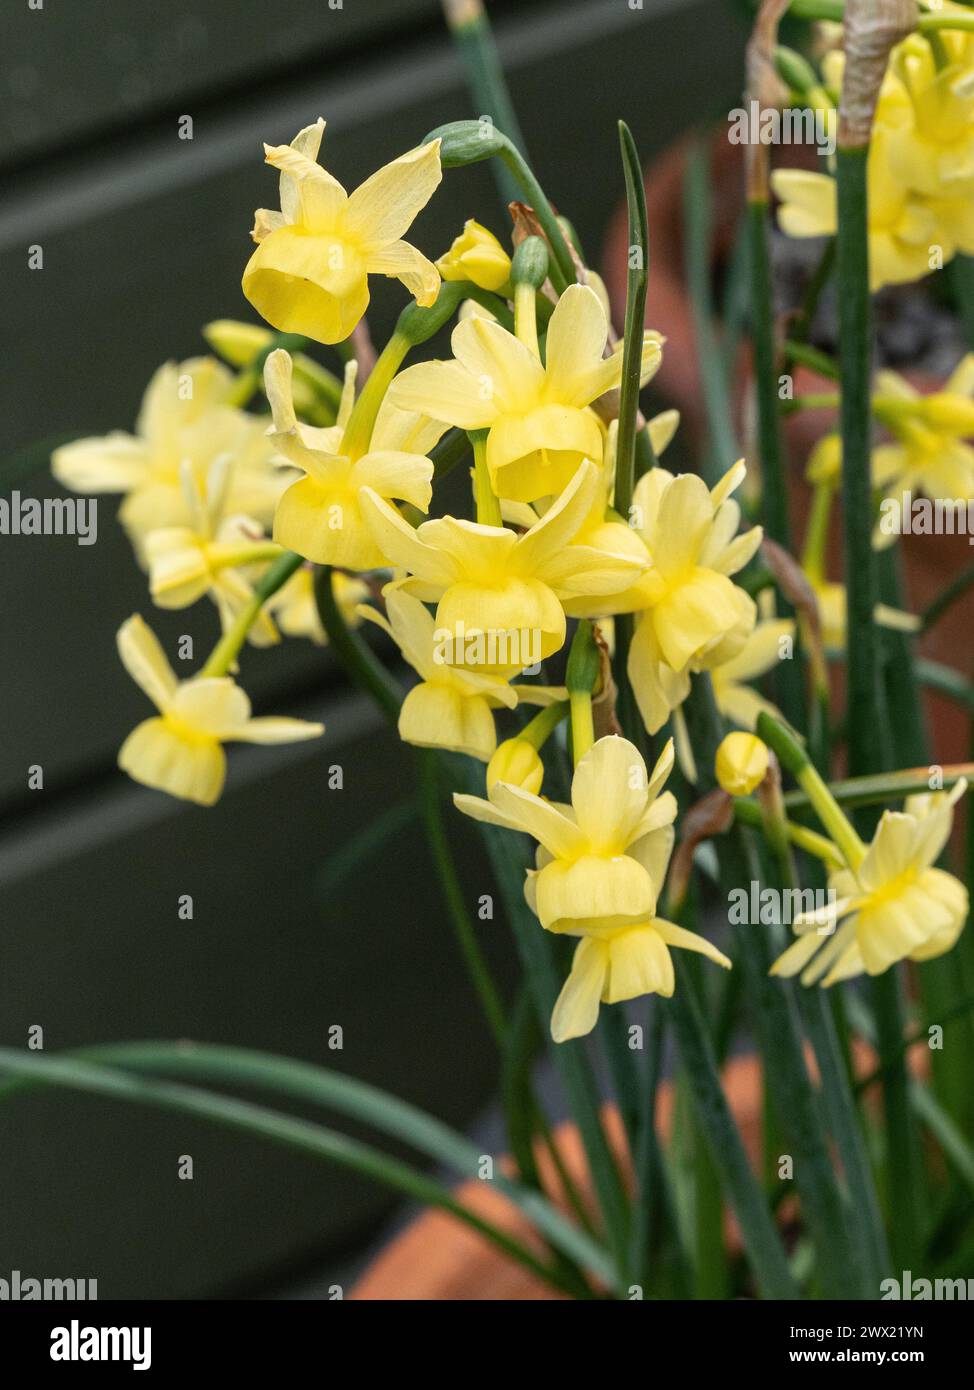 A close up of the delicate pale yellow flowers of the miniature daffodil Narcissus 'Angels Wings' Stock Photo